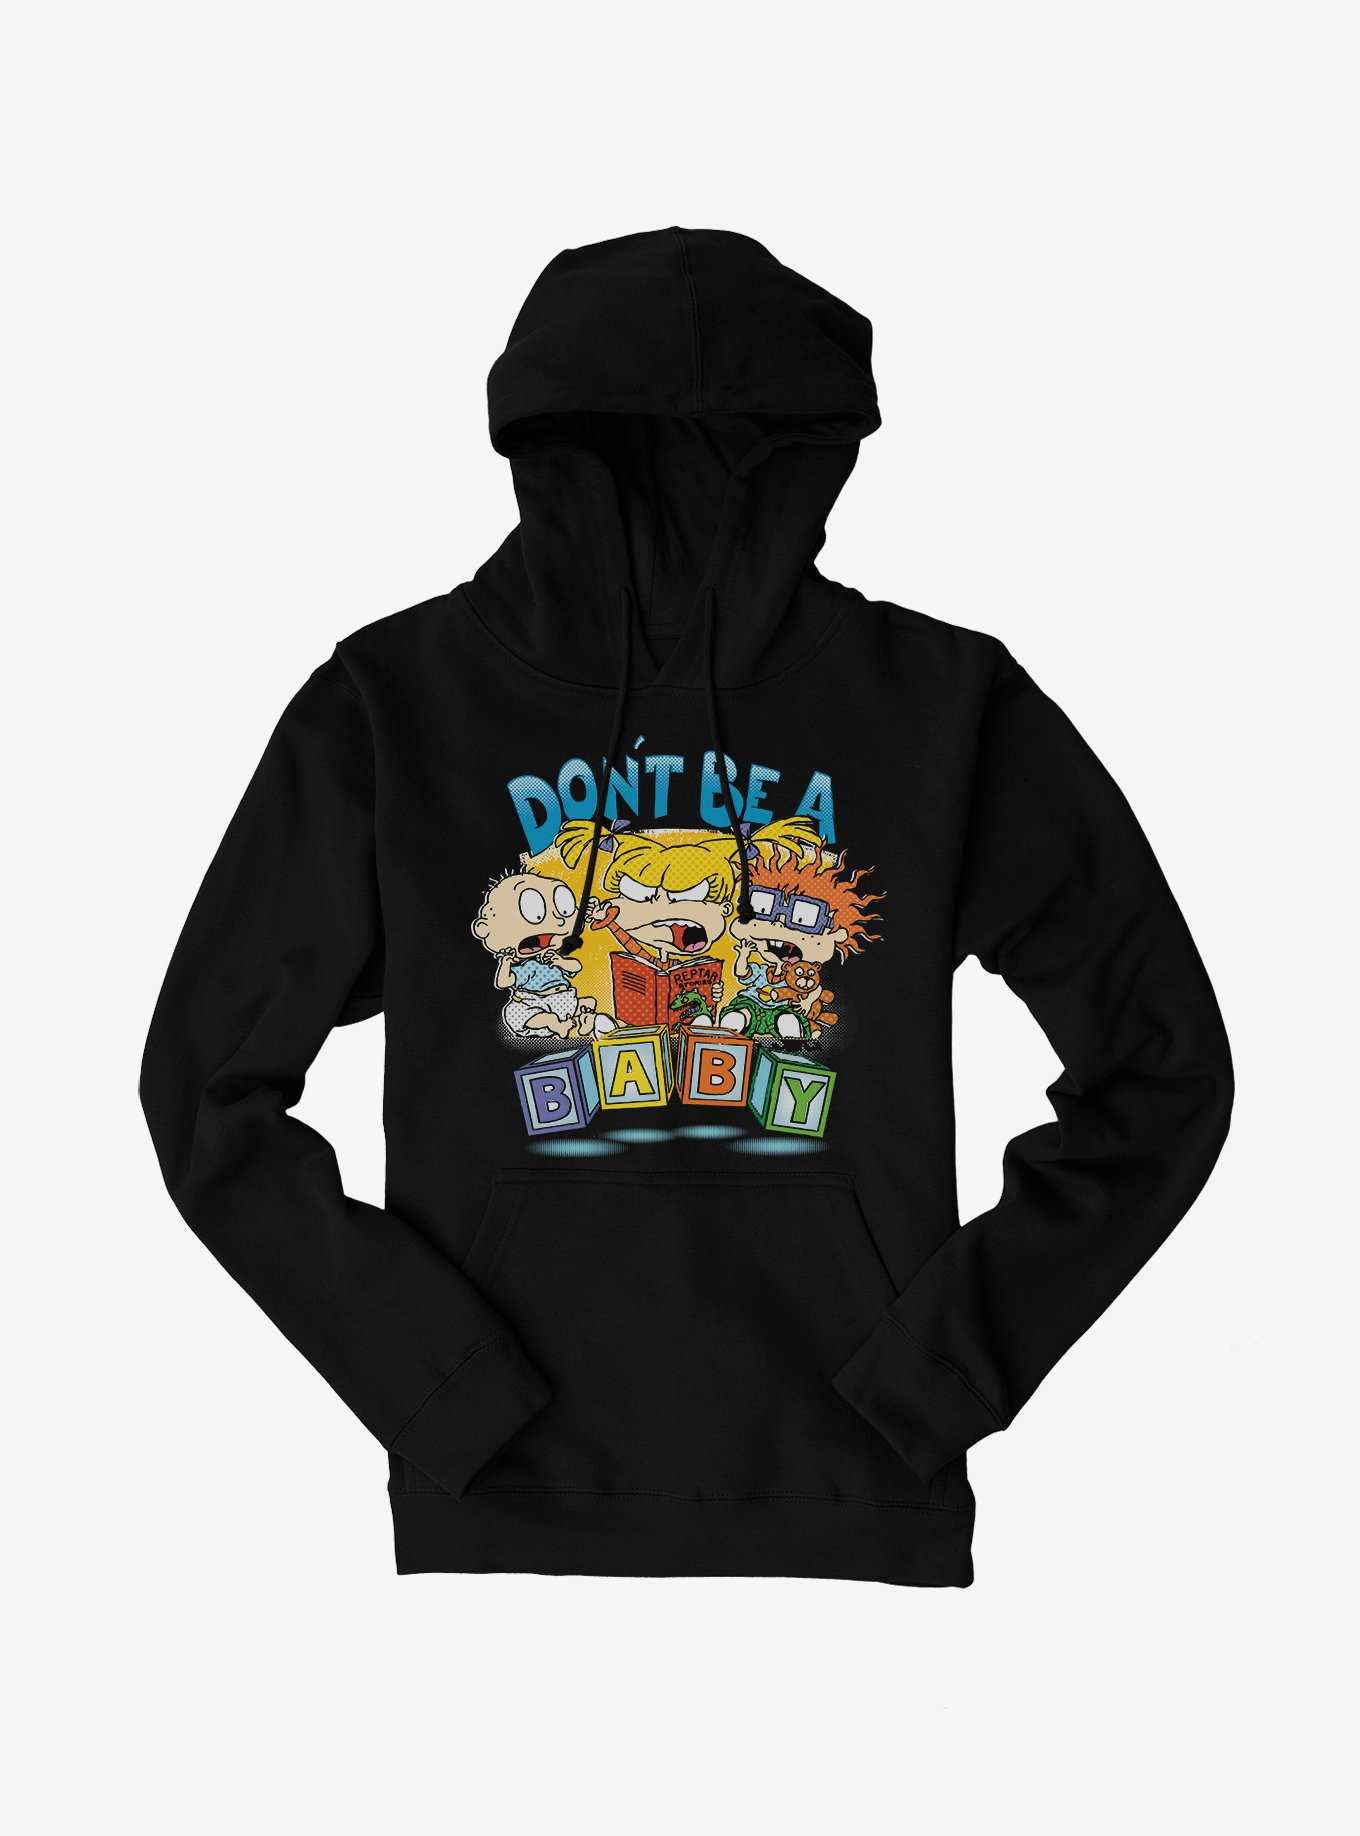 Rugrats Angry Angelica With Tommy And Chuckie Hoodie, , hi-res